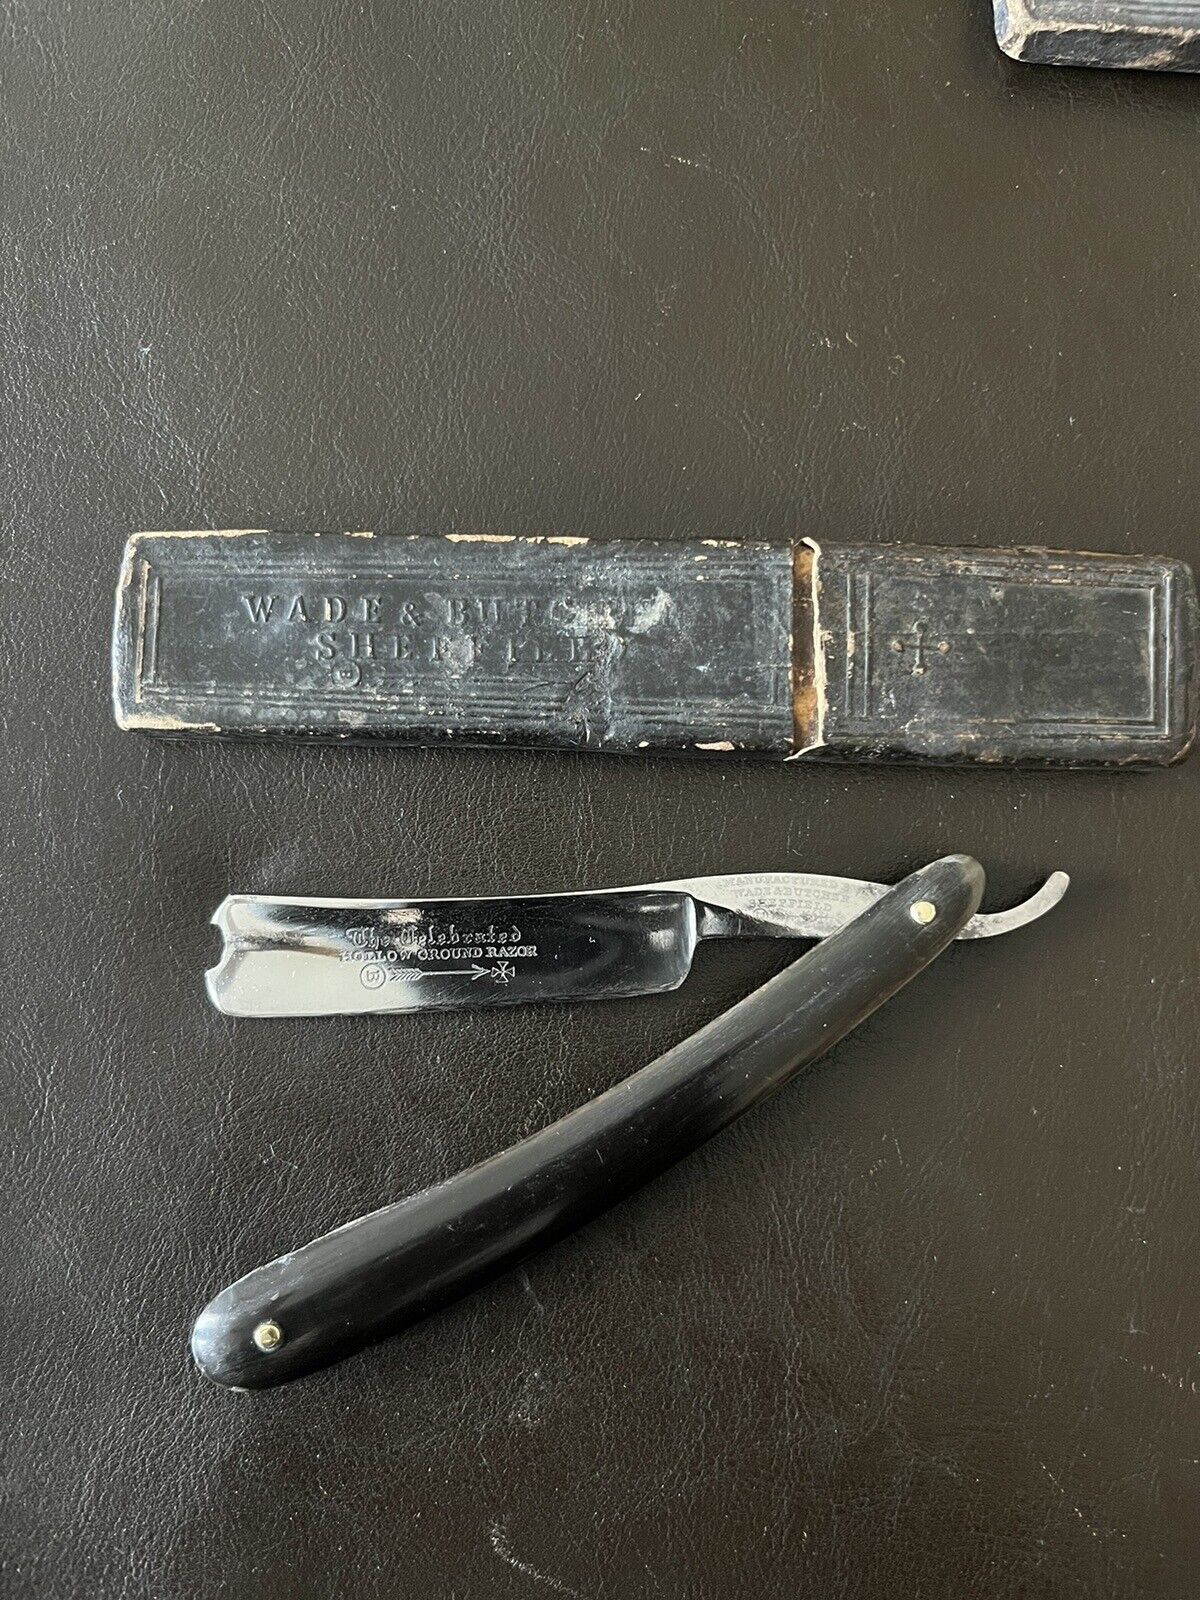 Antique/Vintage Wade & Butcher The Celebrated Hollow Ground Razor